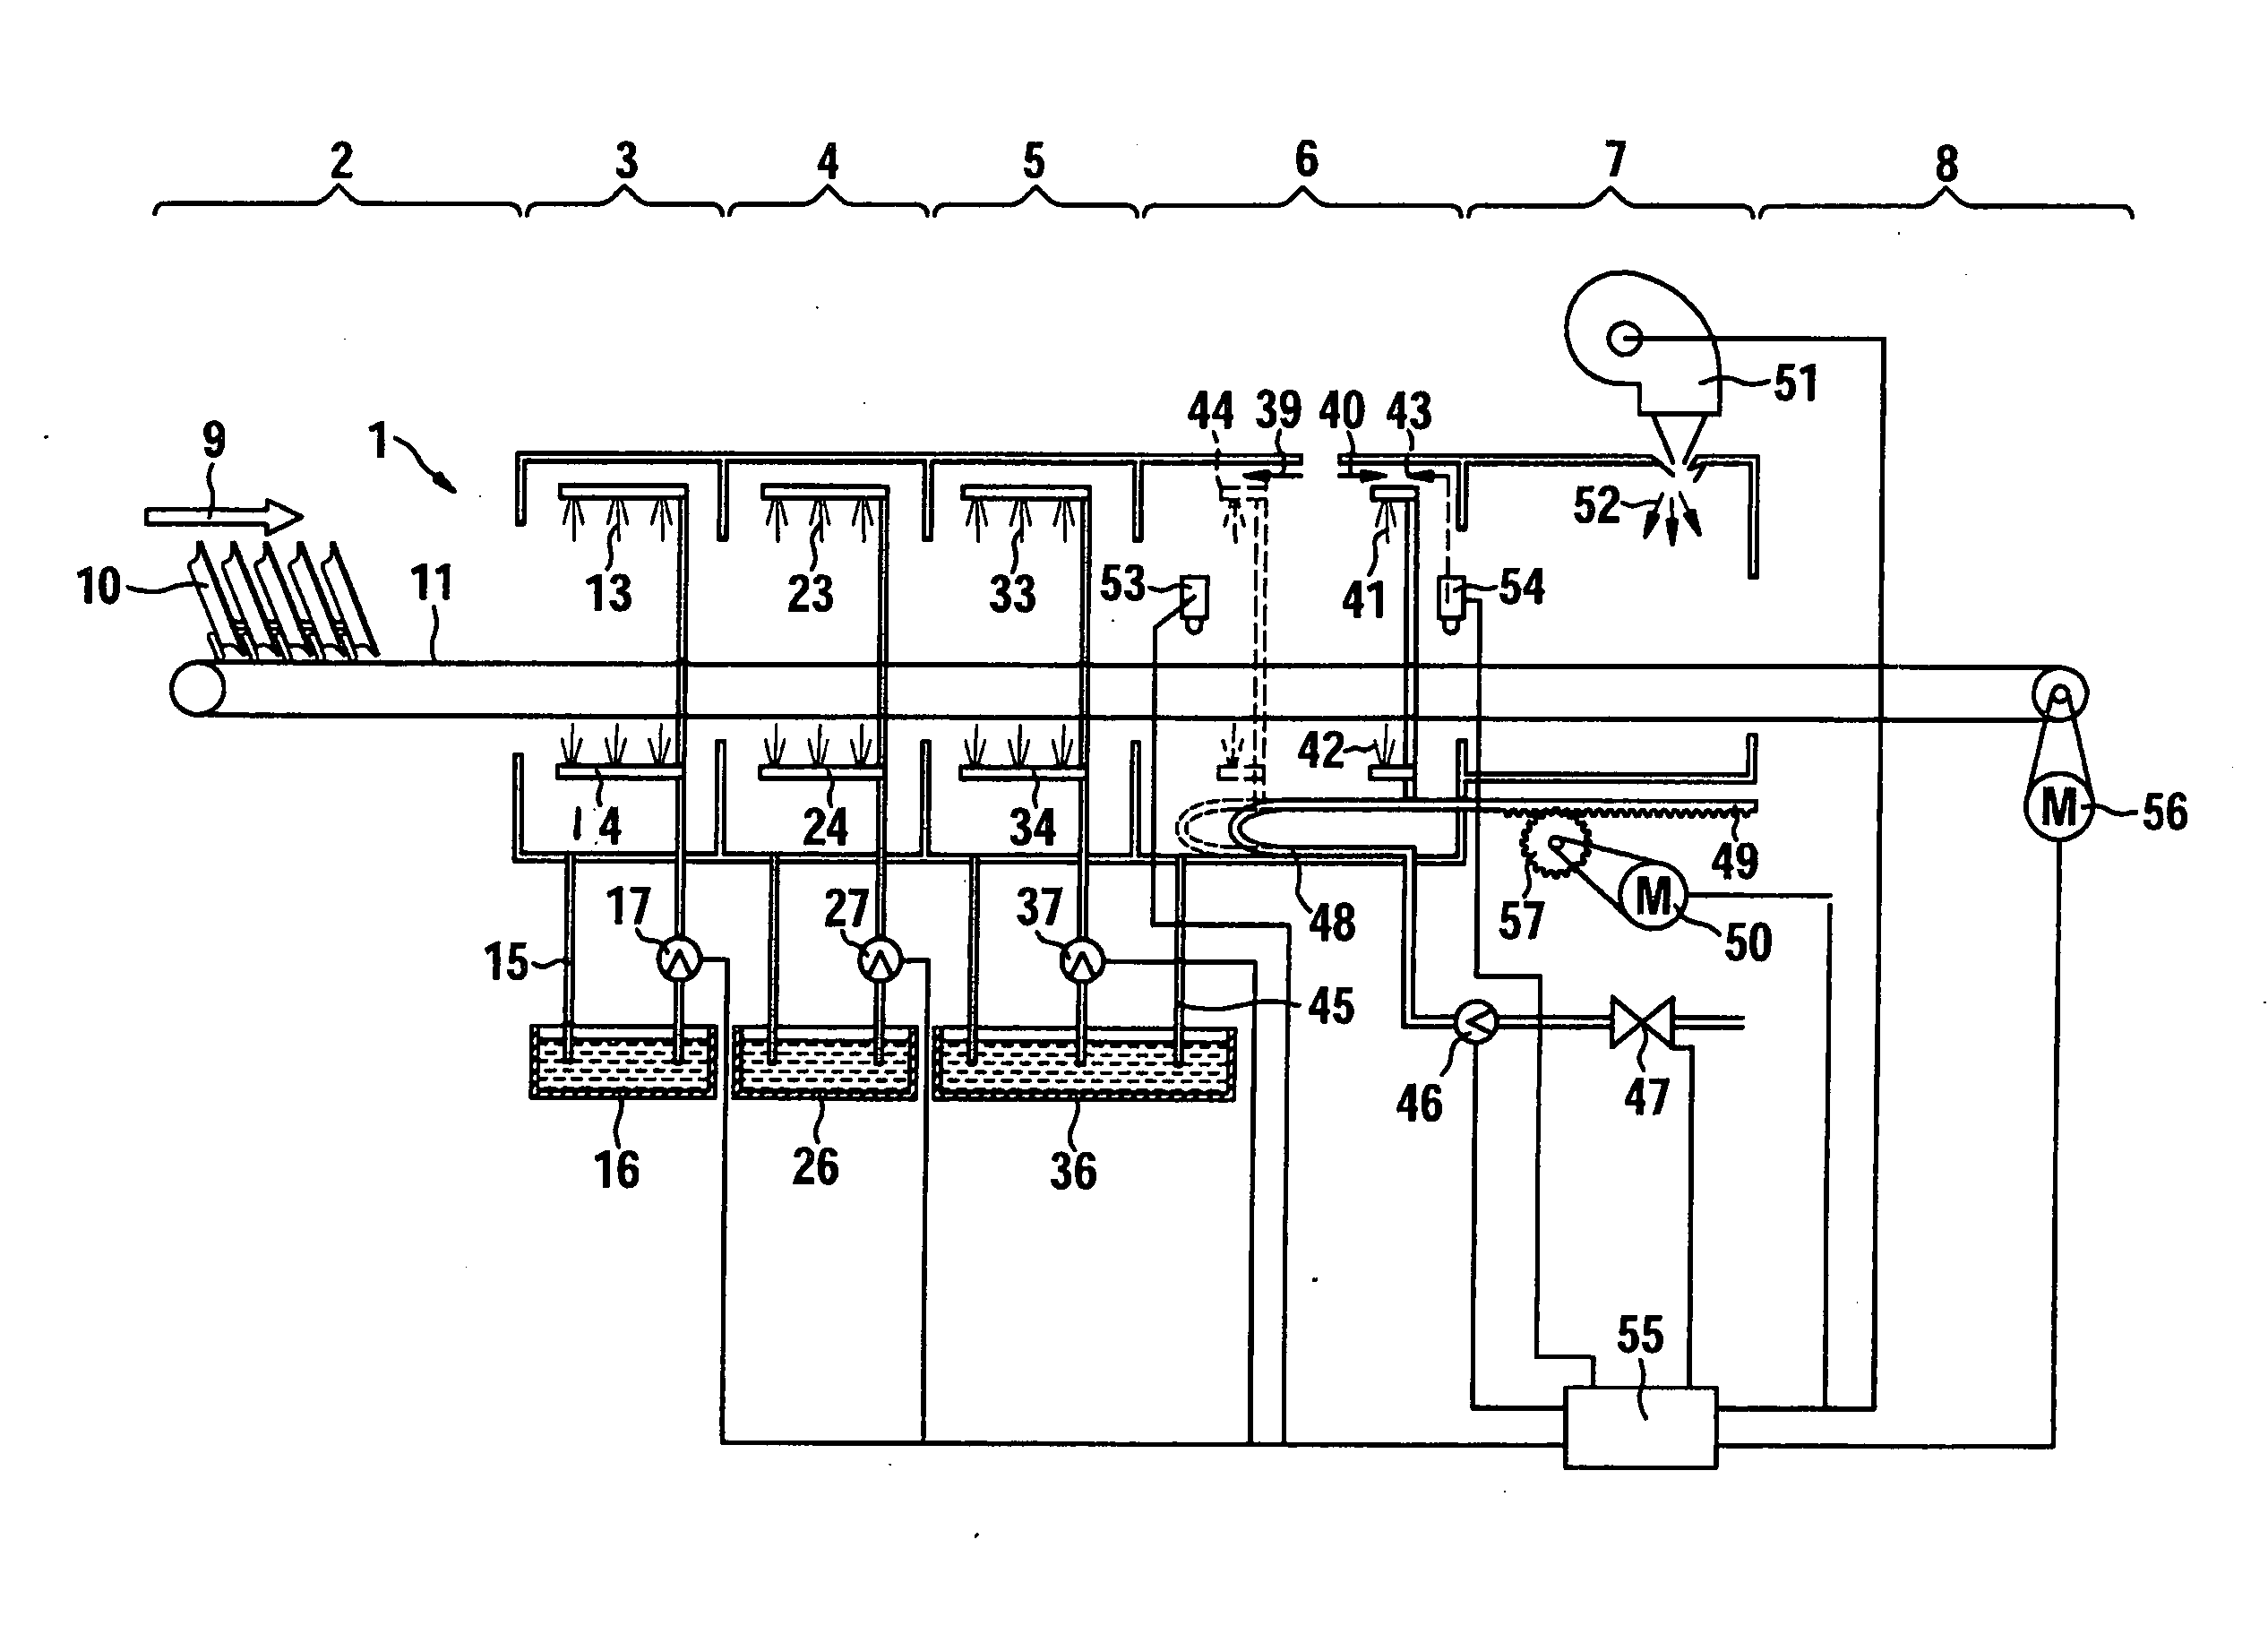 Device for operating a conveying dishwashing machine